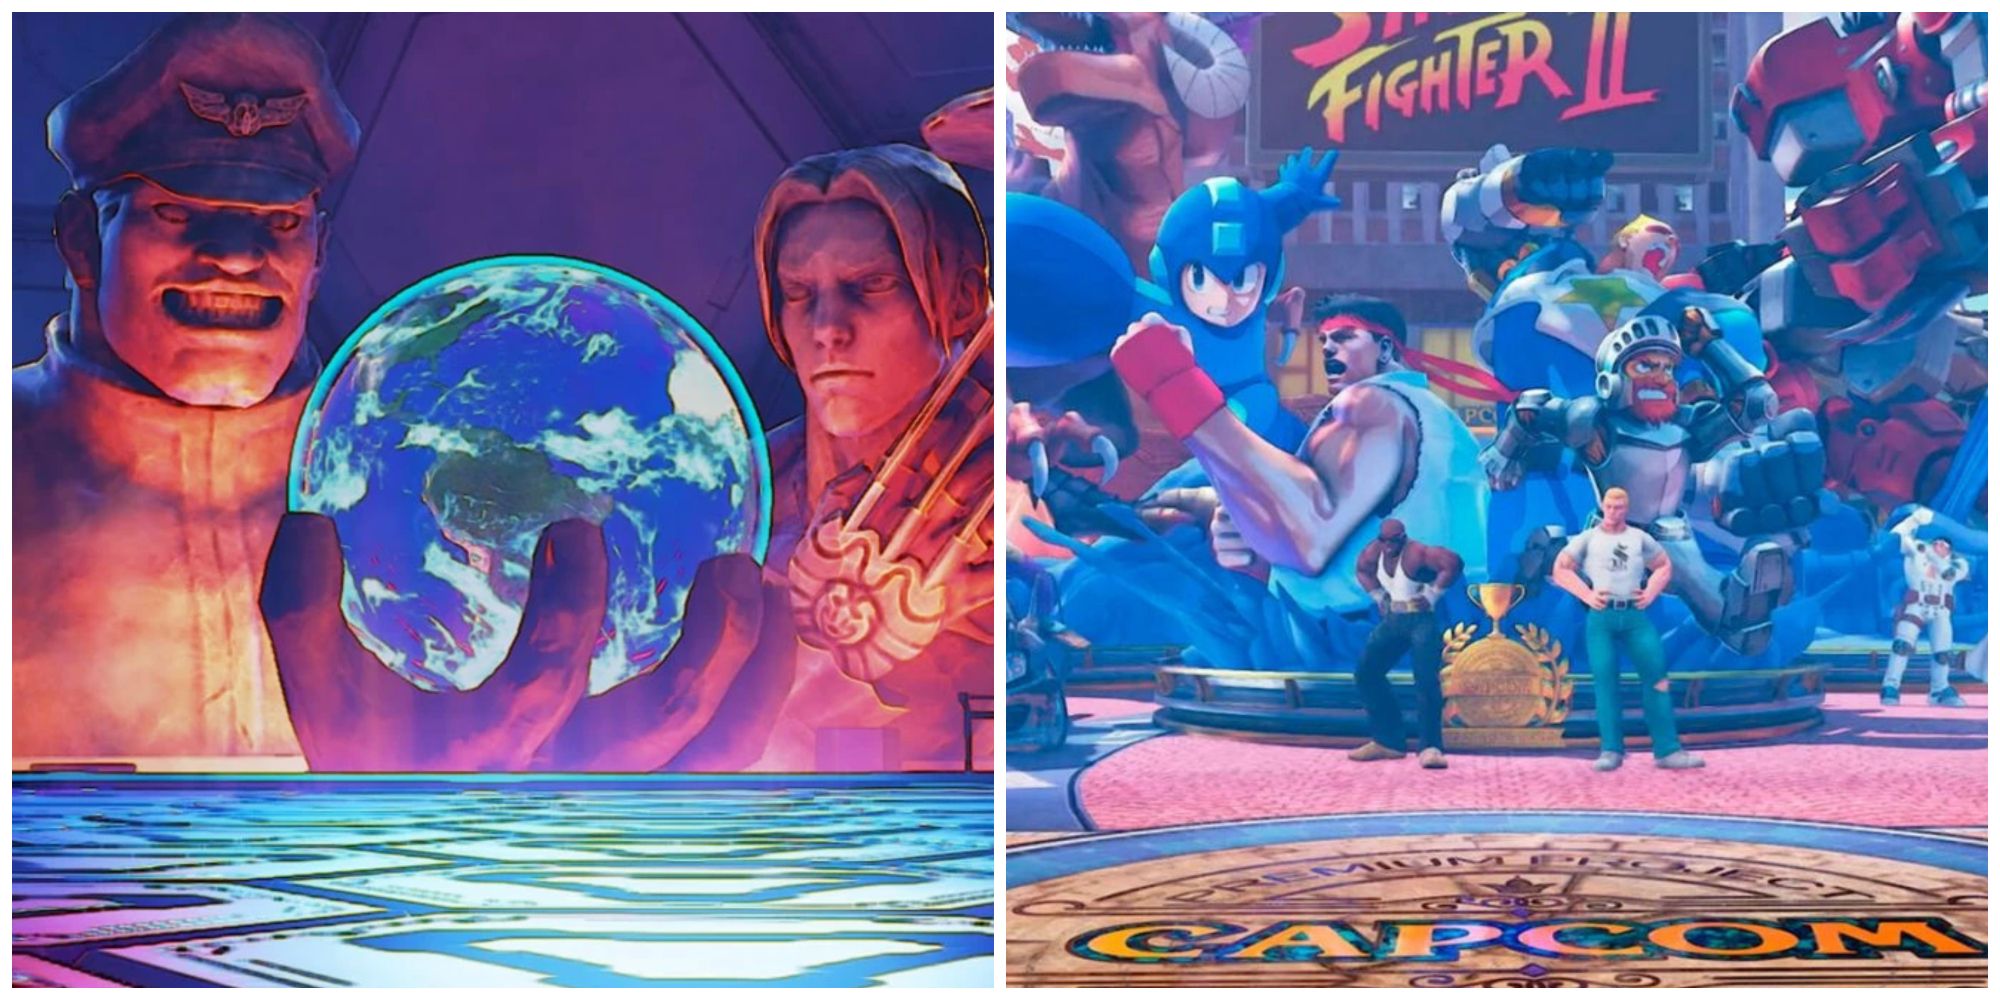 Street_fighter_5_stages_featured_image